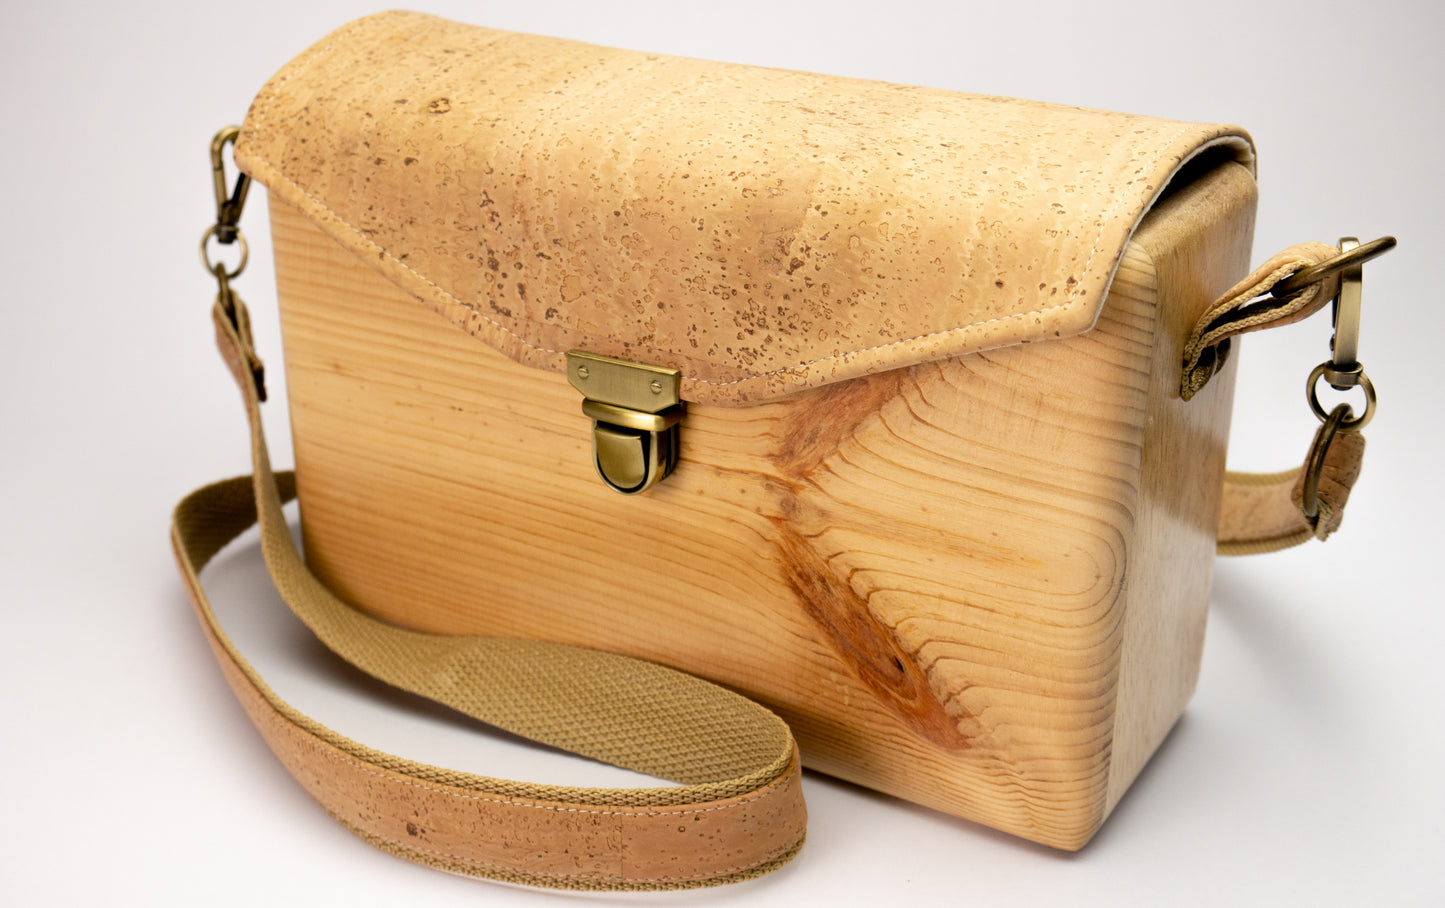 An Eco-Friendly wooden handmade crossbody bag with natural cork leather.